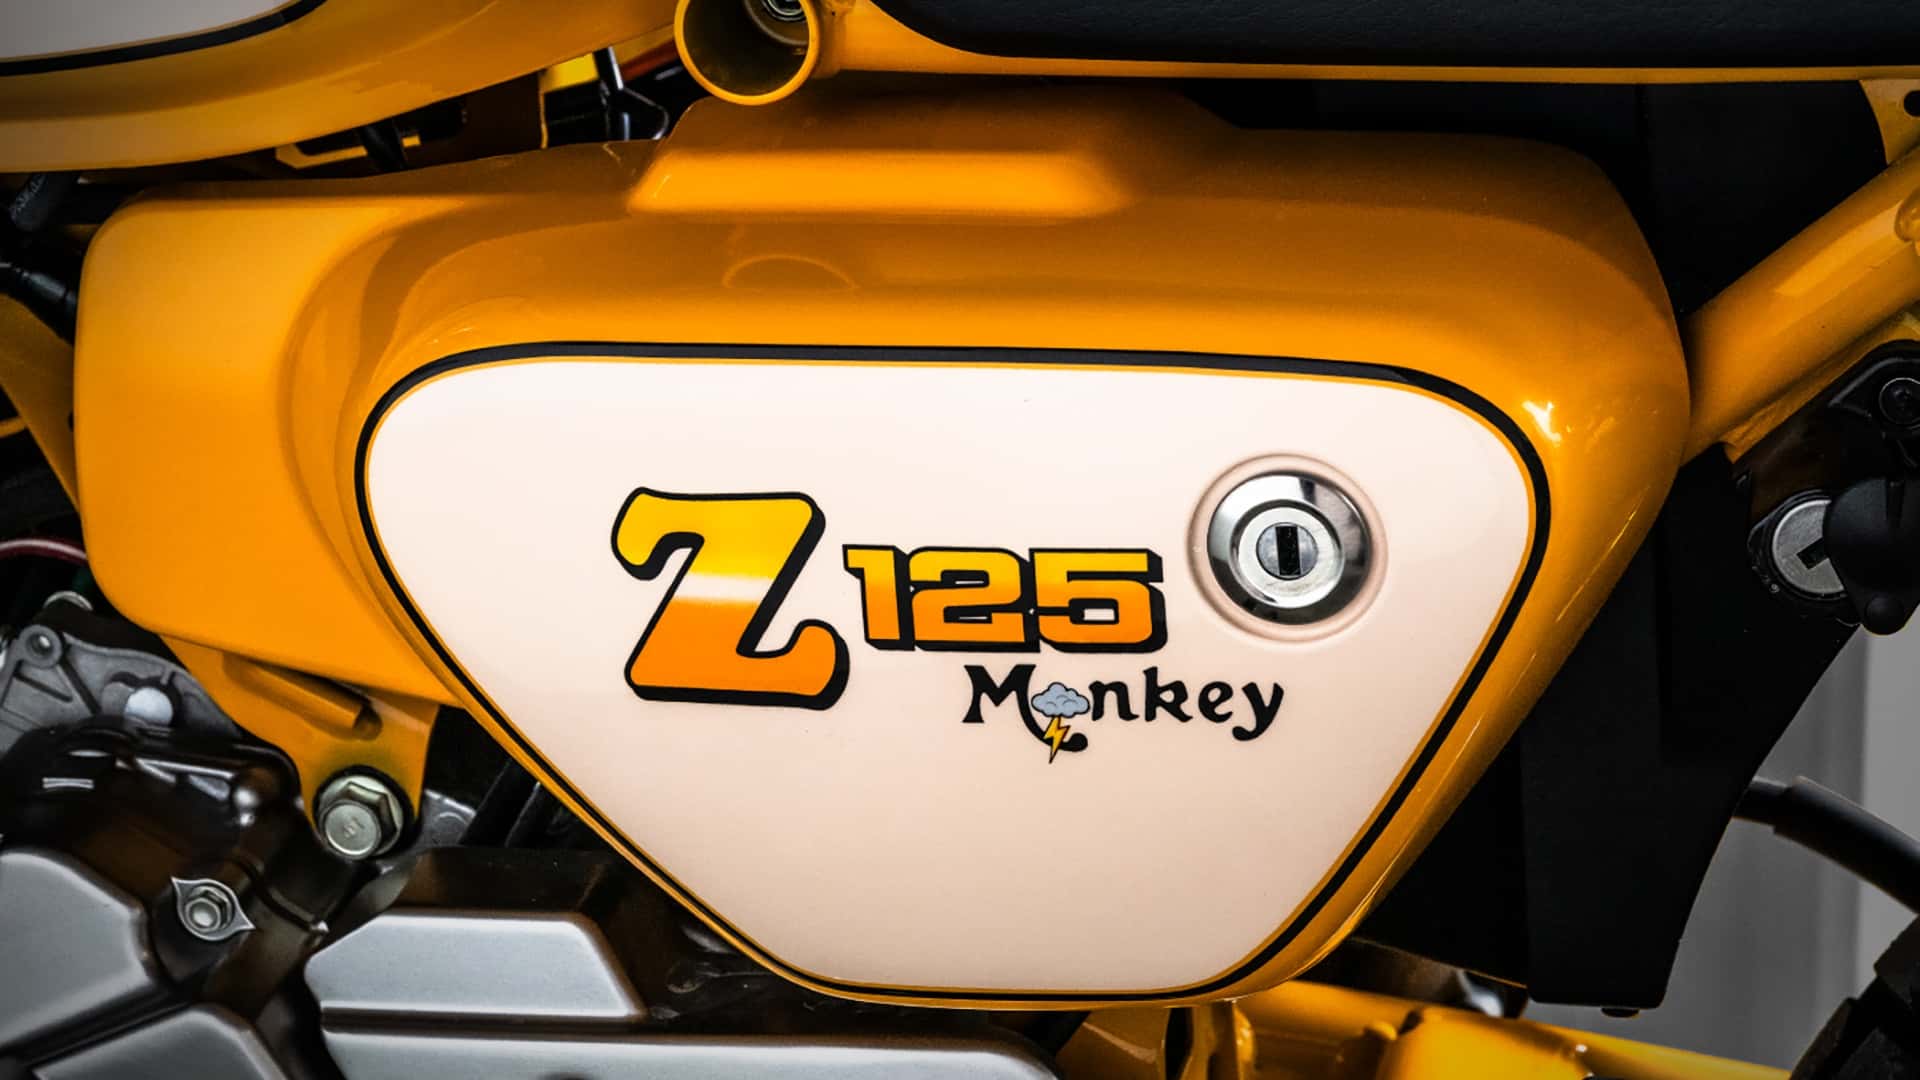 Honda Monkey 125 Lightning Edition Makes Official Debut - Details and Photos - back